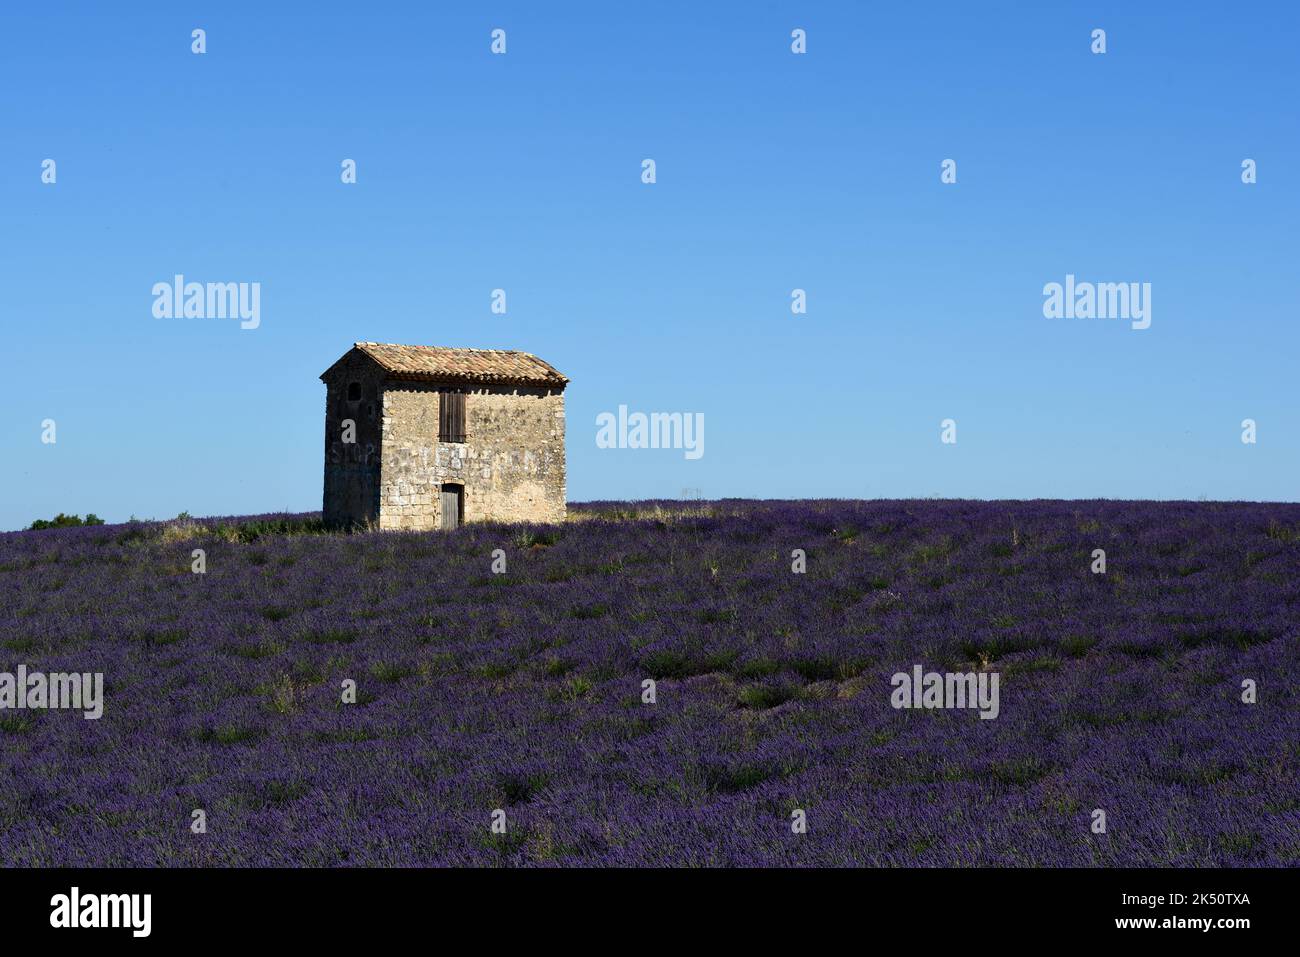 Tiny House, Hut or Cabanon Among the Lavender Fields of the Valensole Plateau Provence France Stock Photo